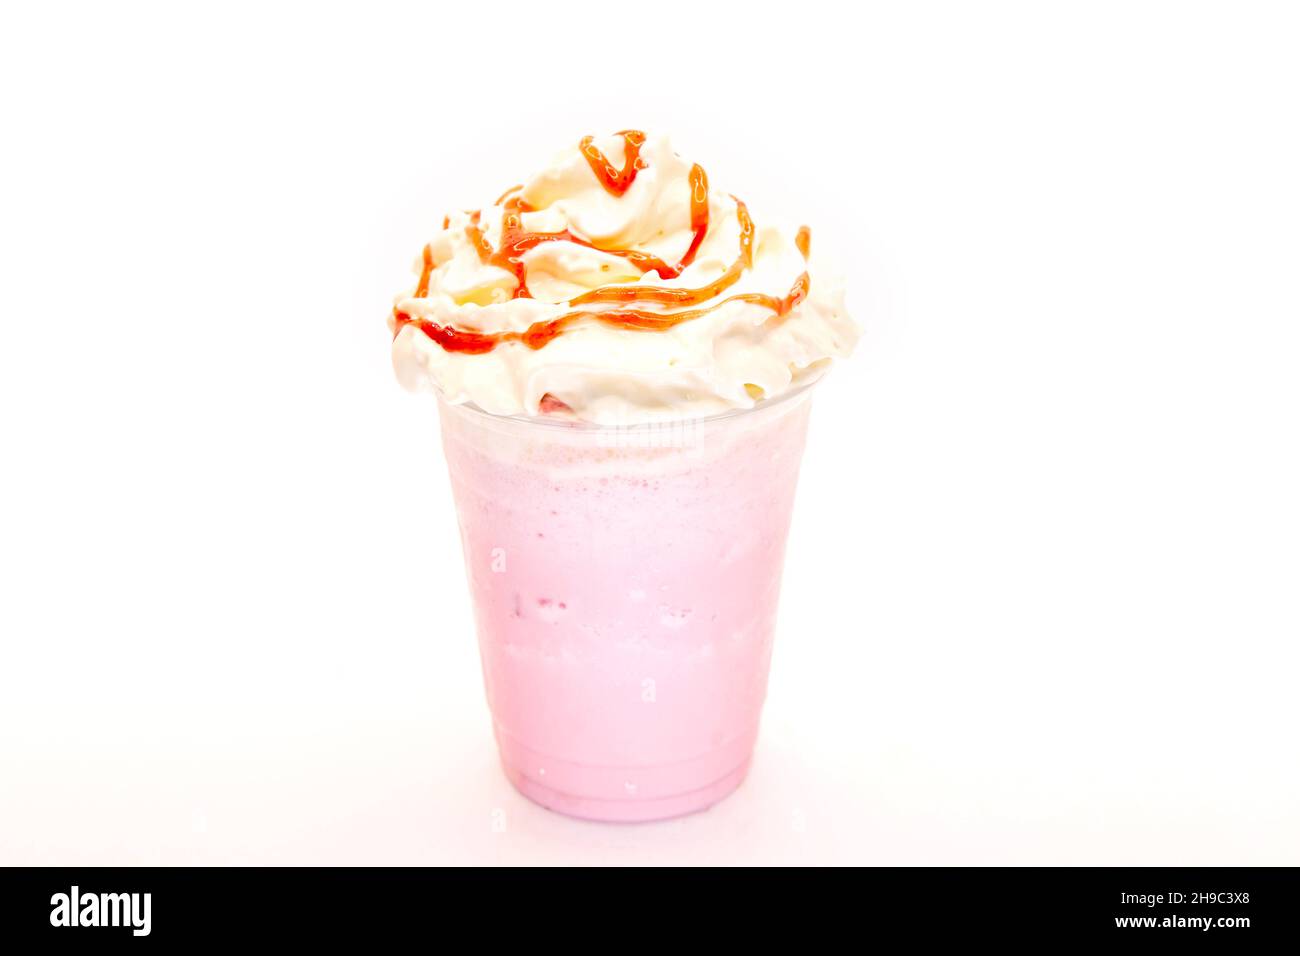 https://c8.alamy.com/comp/2H9C3X8/strawberry-milk-shake-with-syrup-drizzled-on-whipped-cream-in-a-plastic-disposable-cup-2H9C3X8.jpg